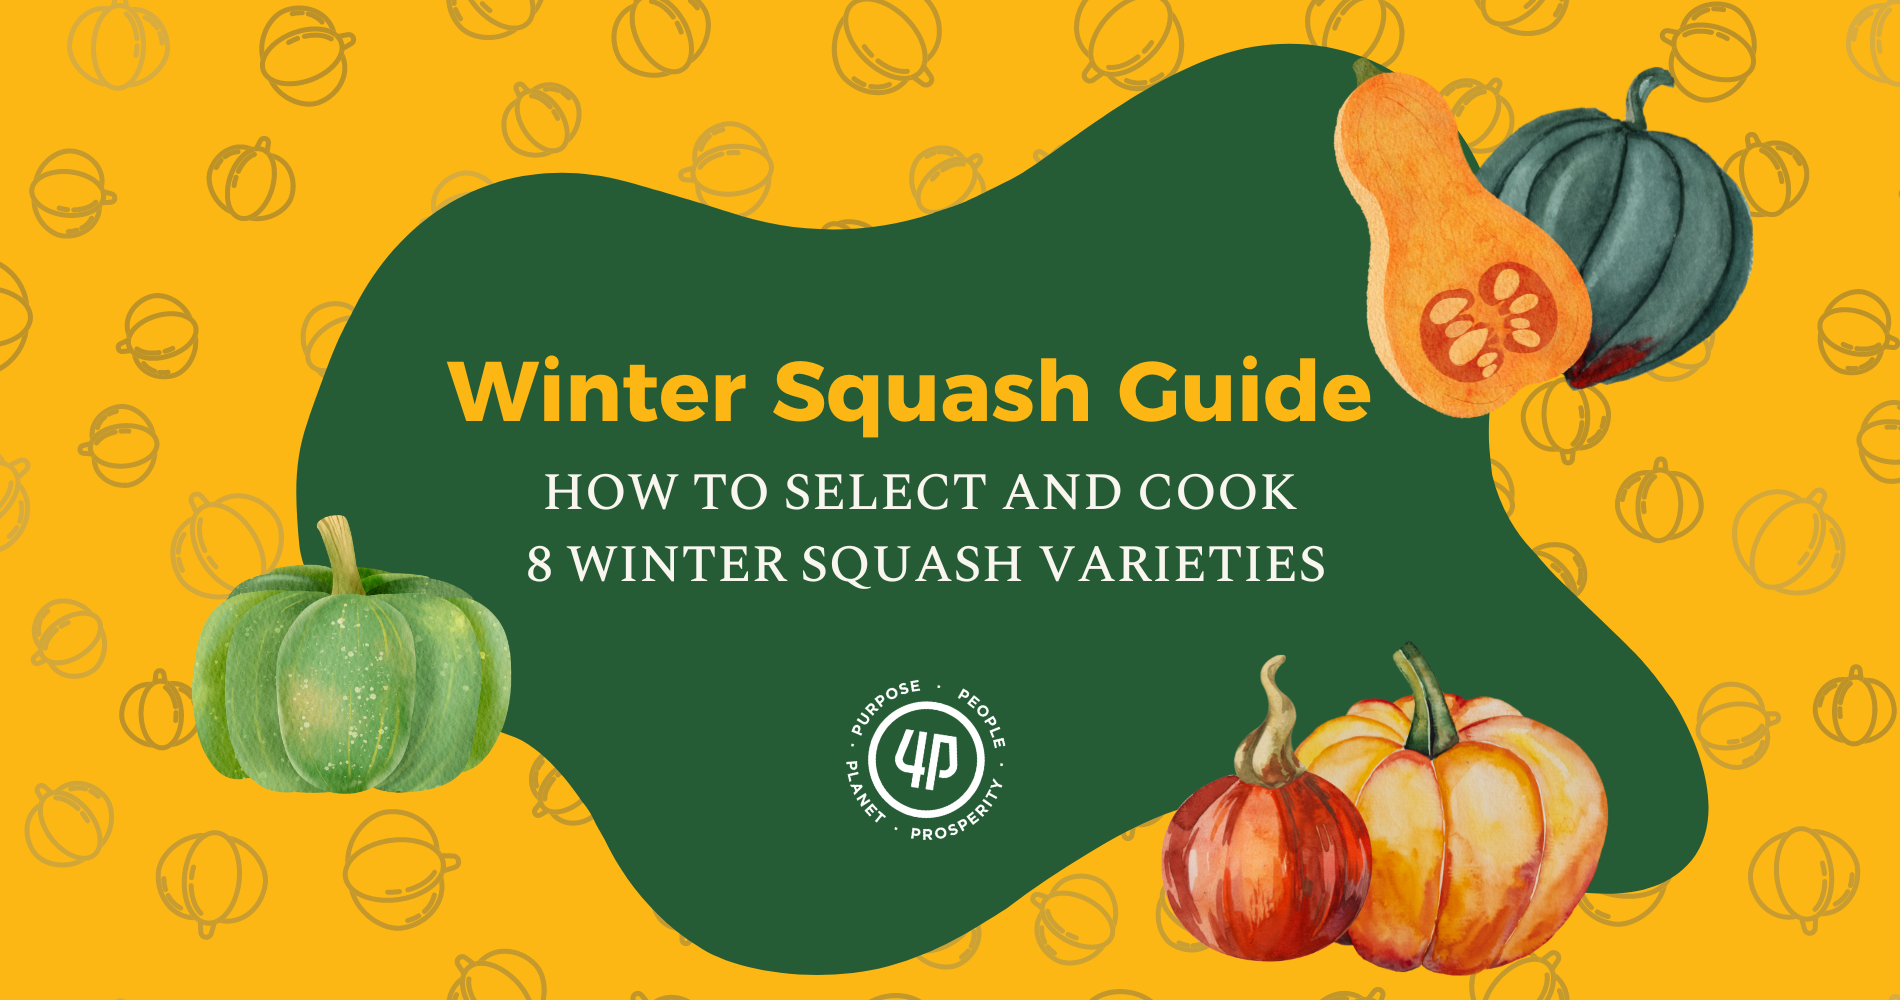 Kind Re-Gourds: How To Select And Cook 8 Winter Squash Varieties image